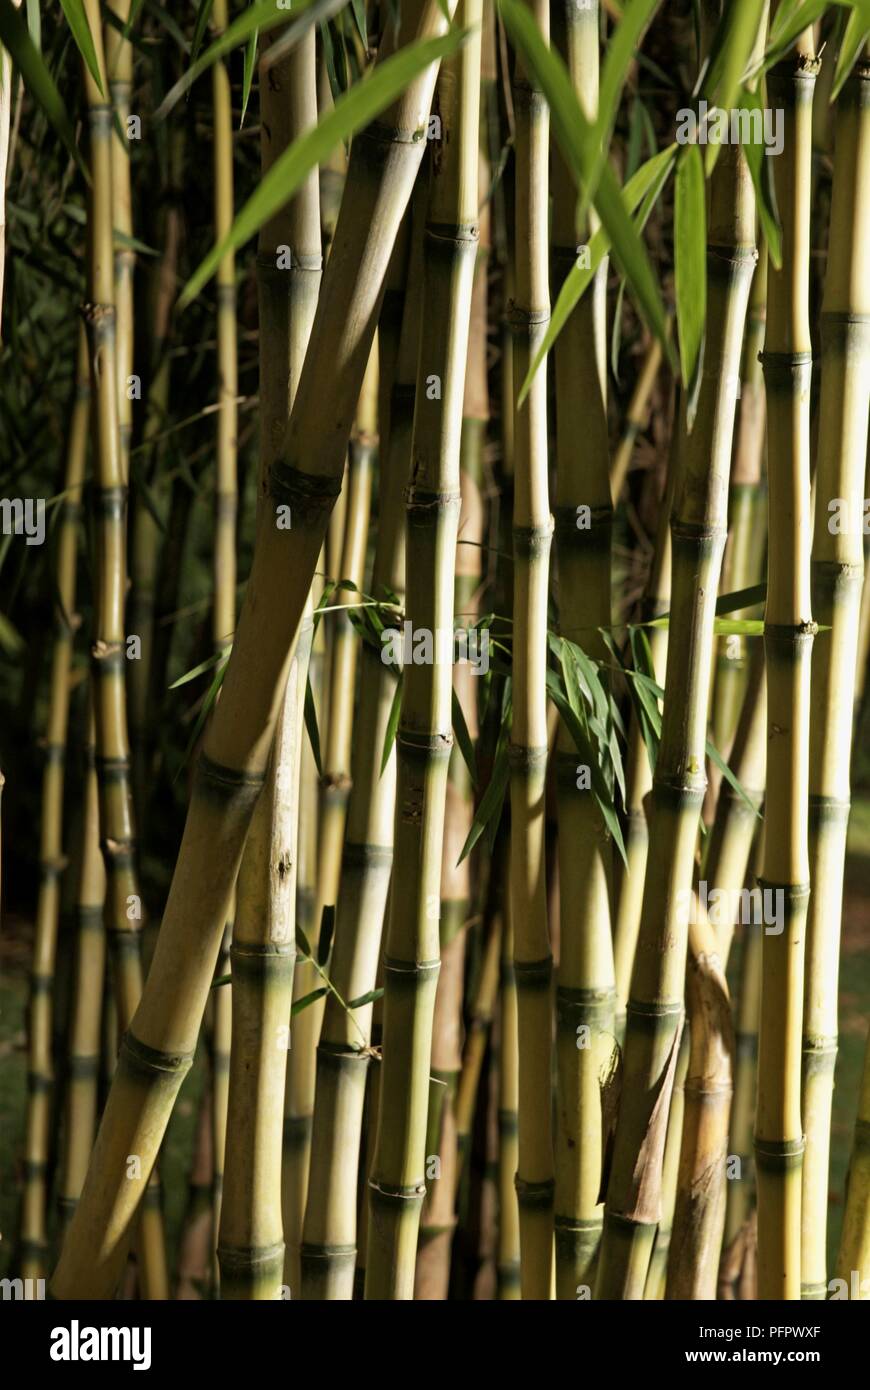 Phyllostachys viridi-glaucescens (Ornamental Bamboo) stems and green leaves Stock Photo